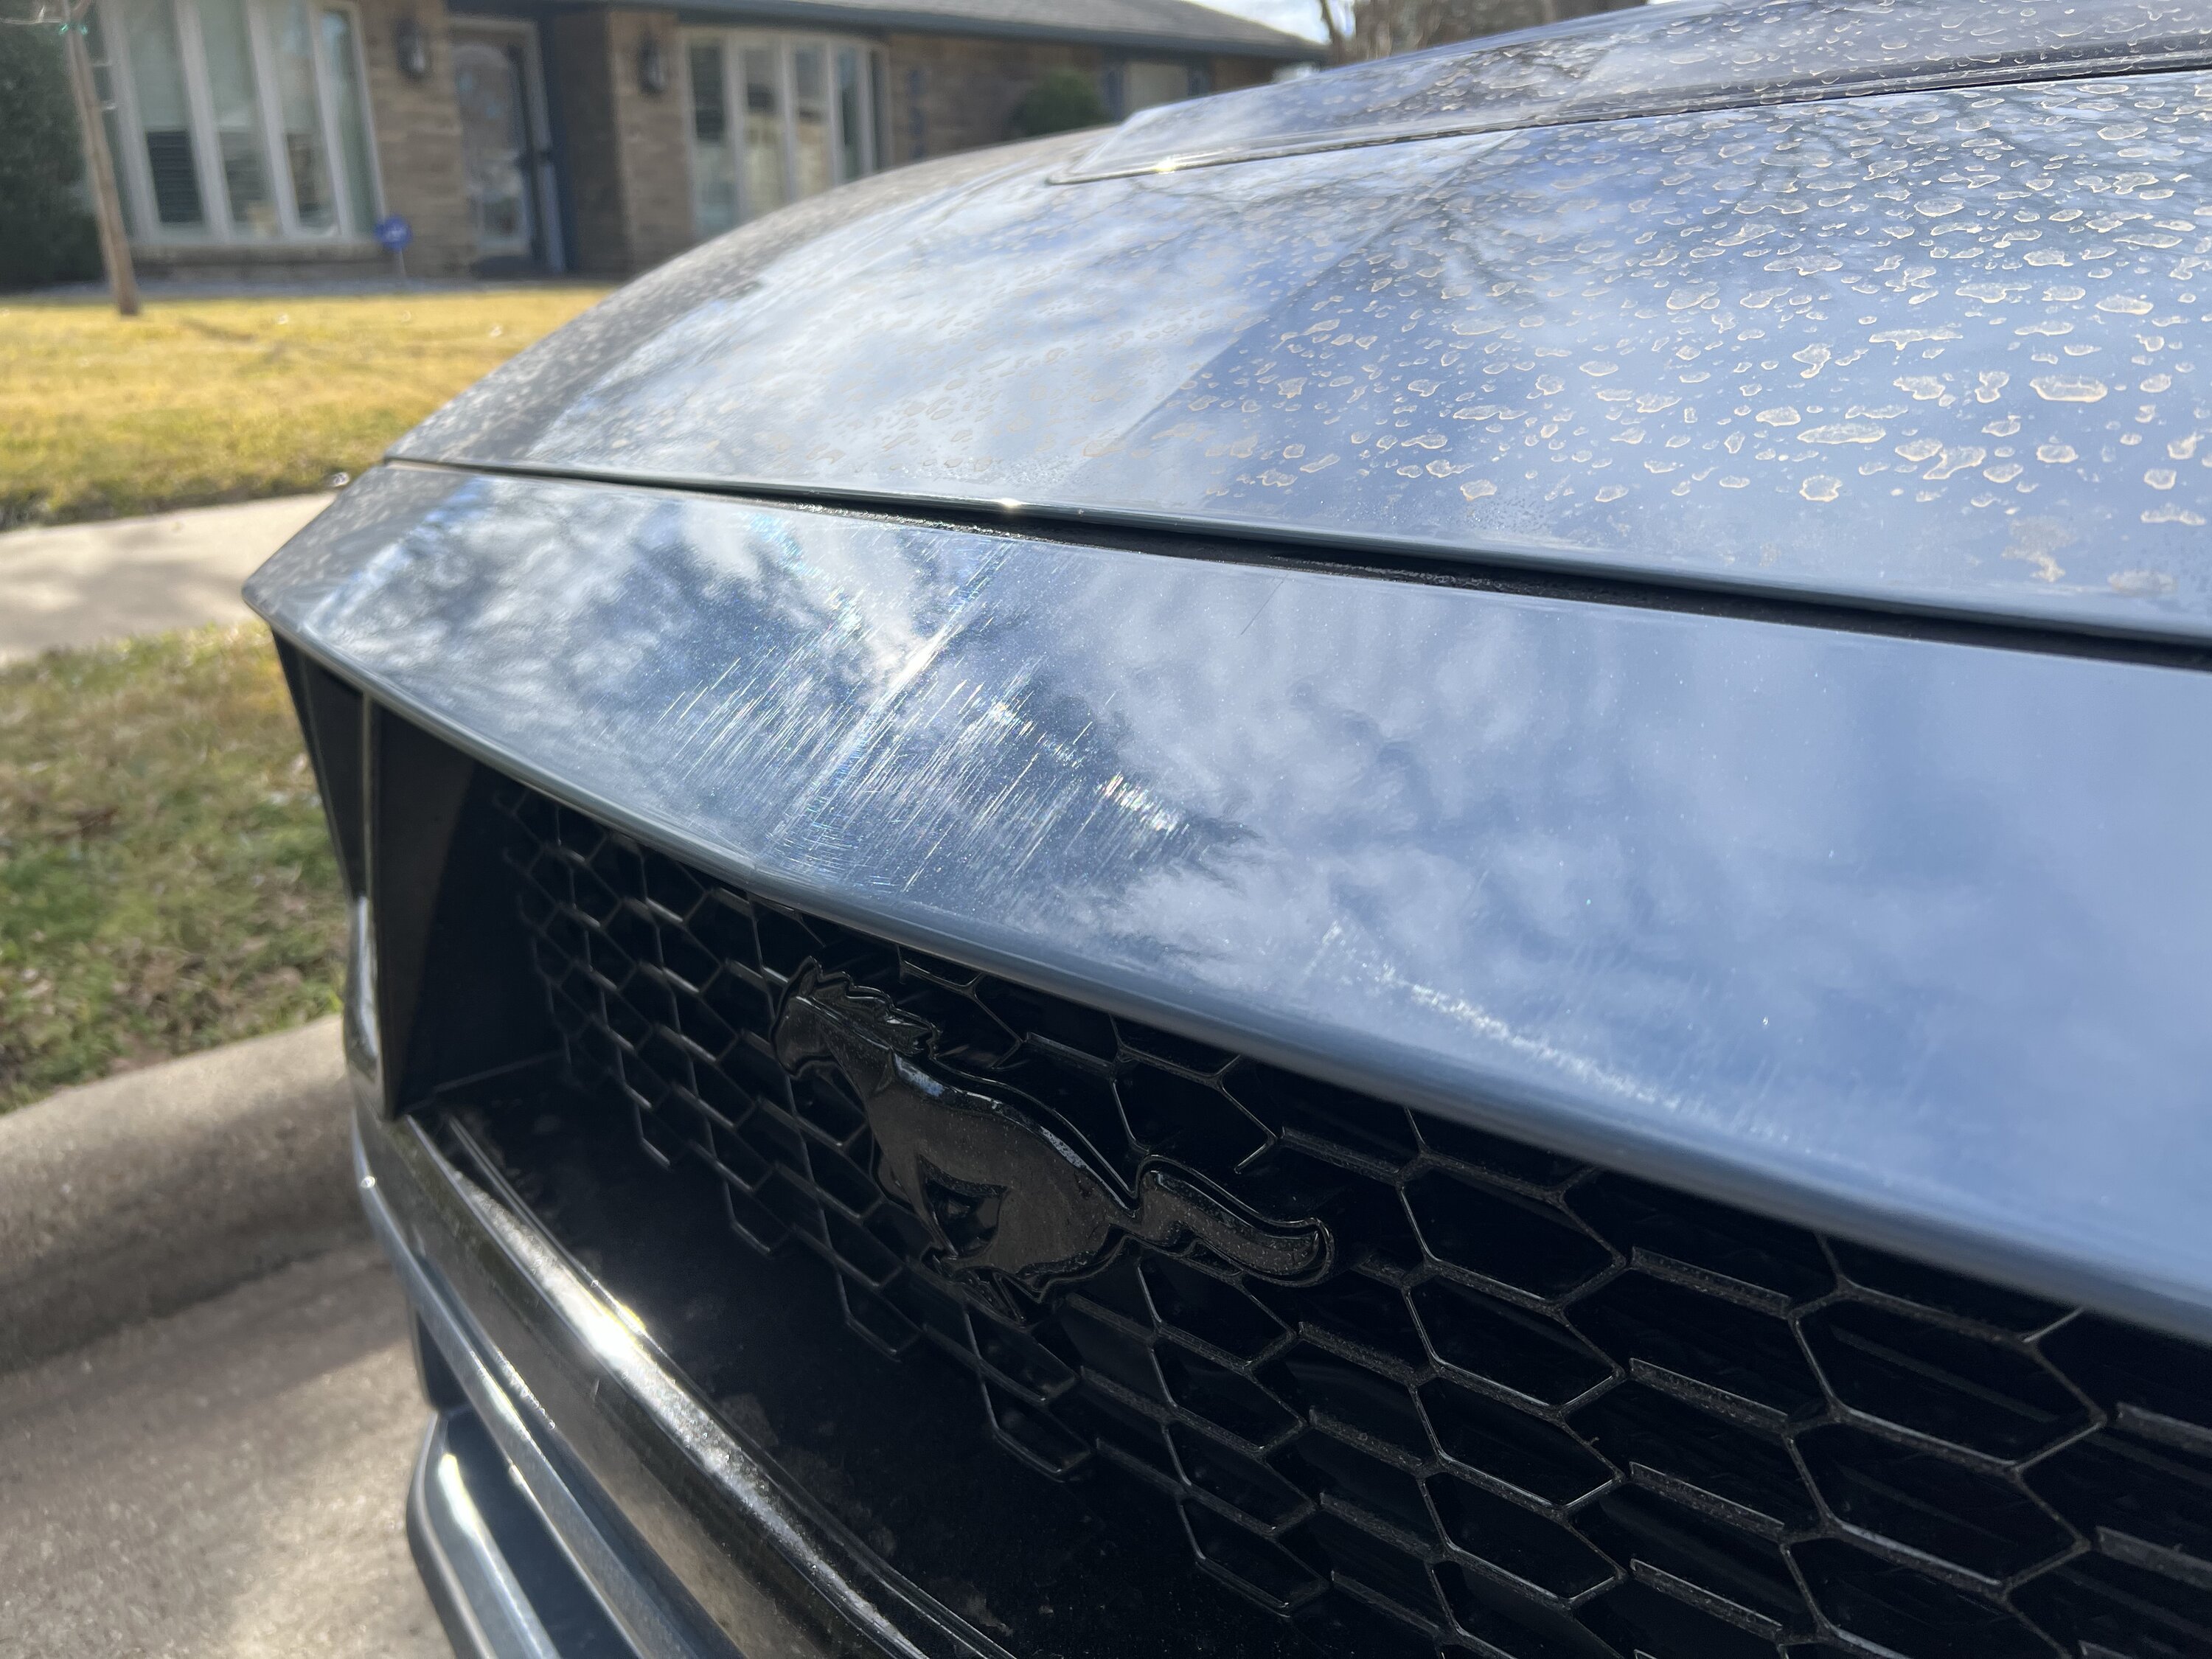 S650 Mustang Got backed into, how bad does the damage look? Next steps? IMG_6761